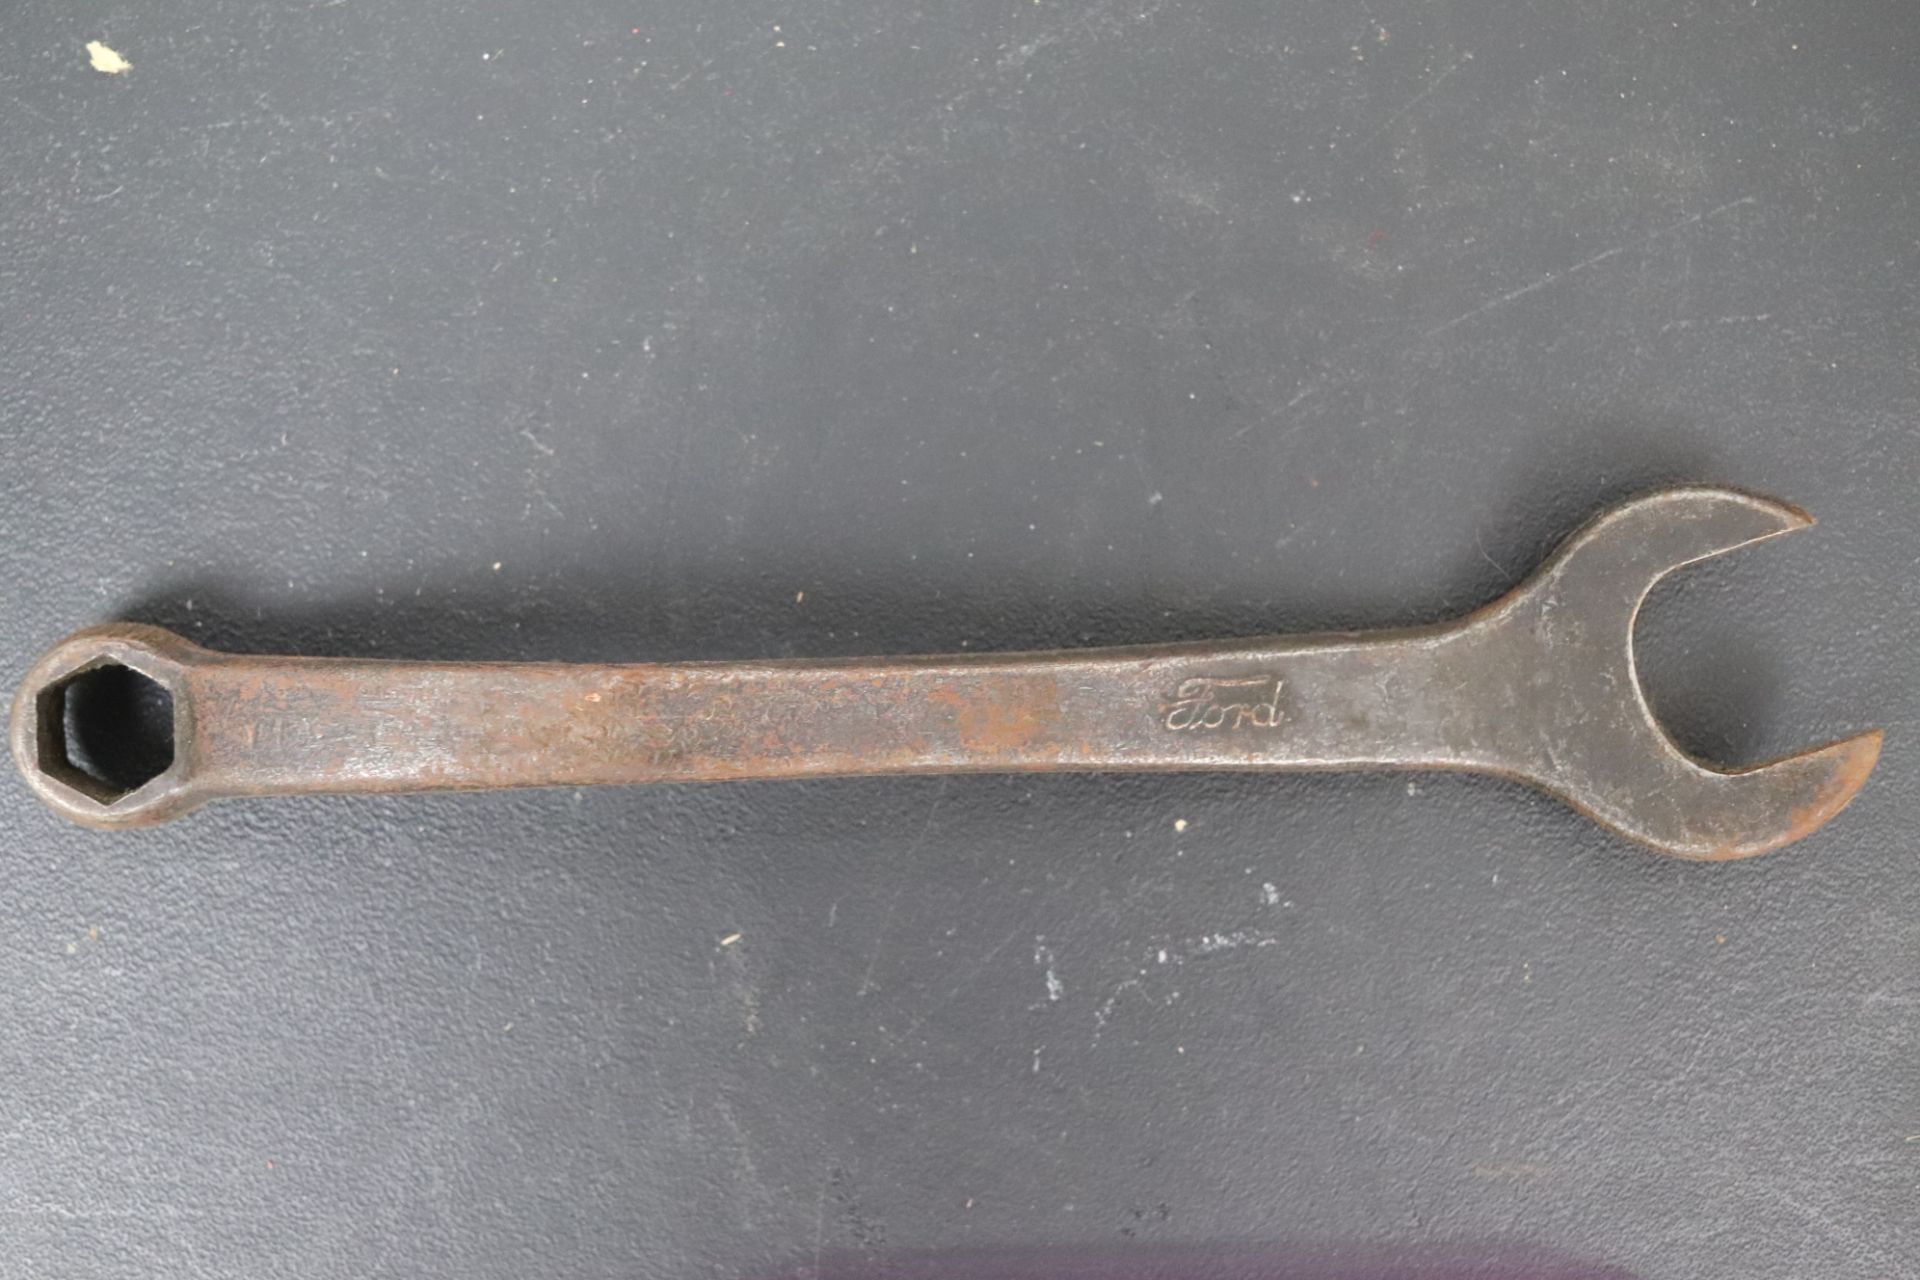 Ford Model T wrench - Image 2 of 6